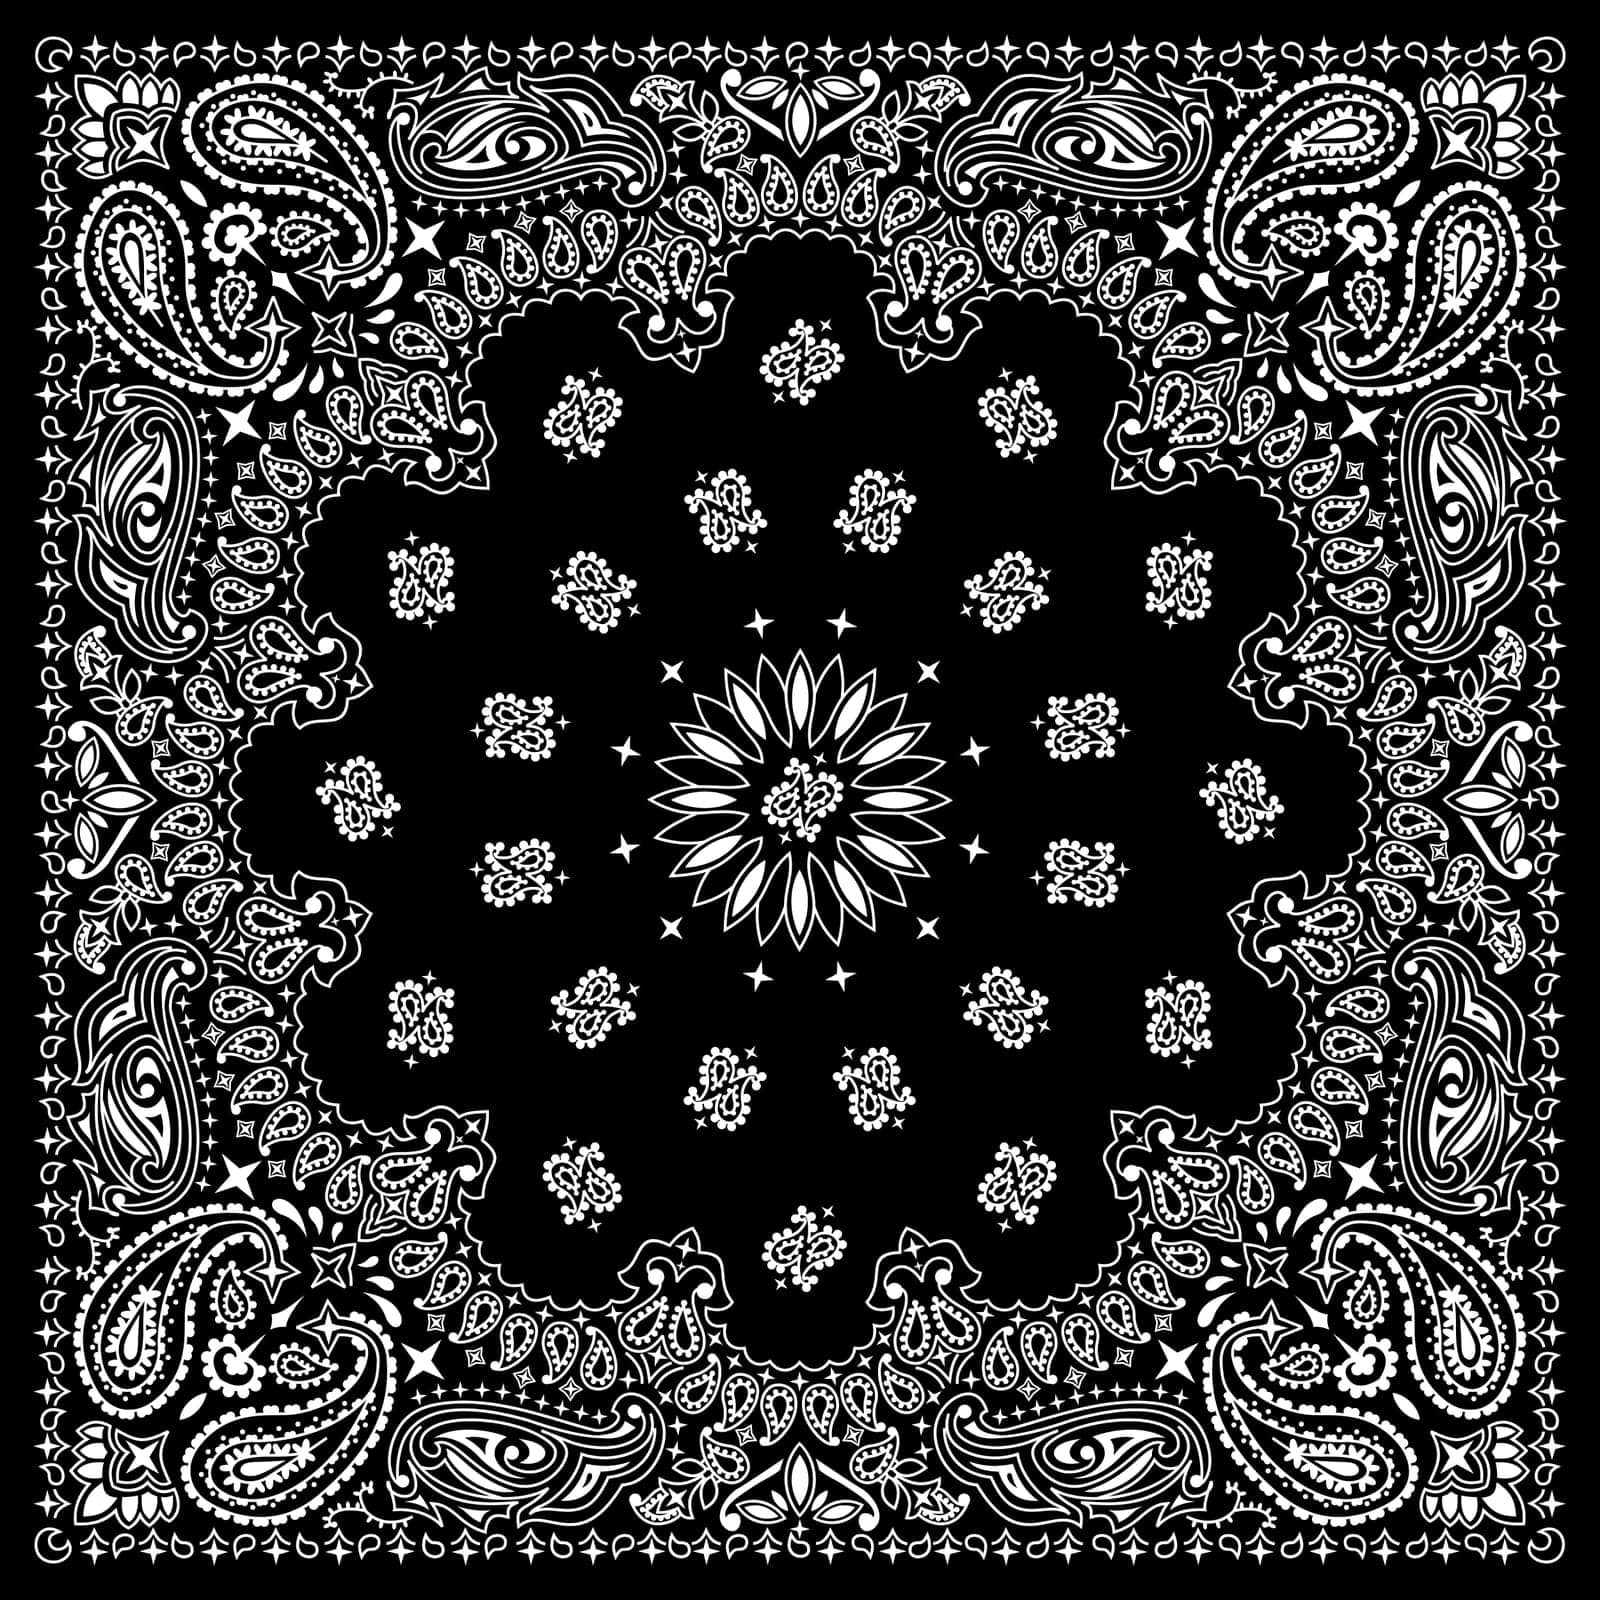 Black bandana with white ornaments. No transparency and gradients used.